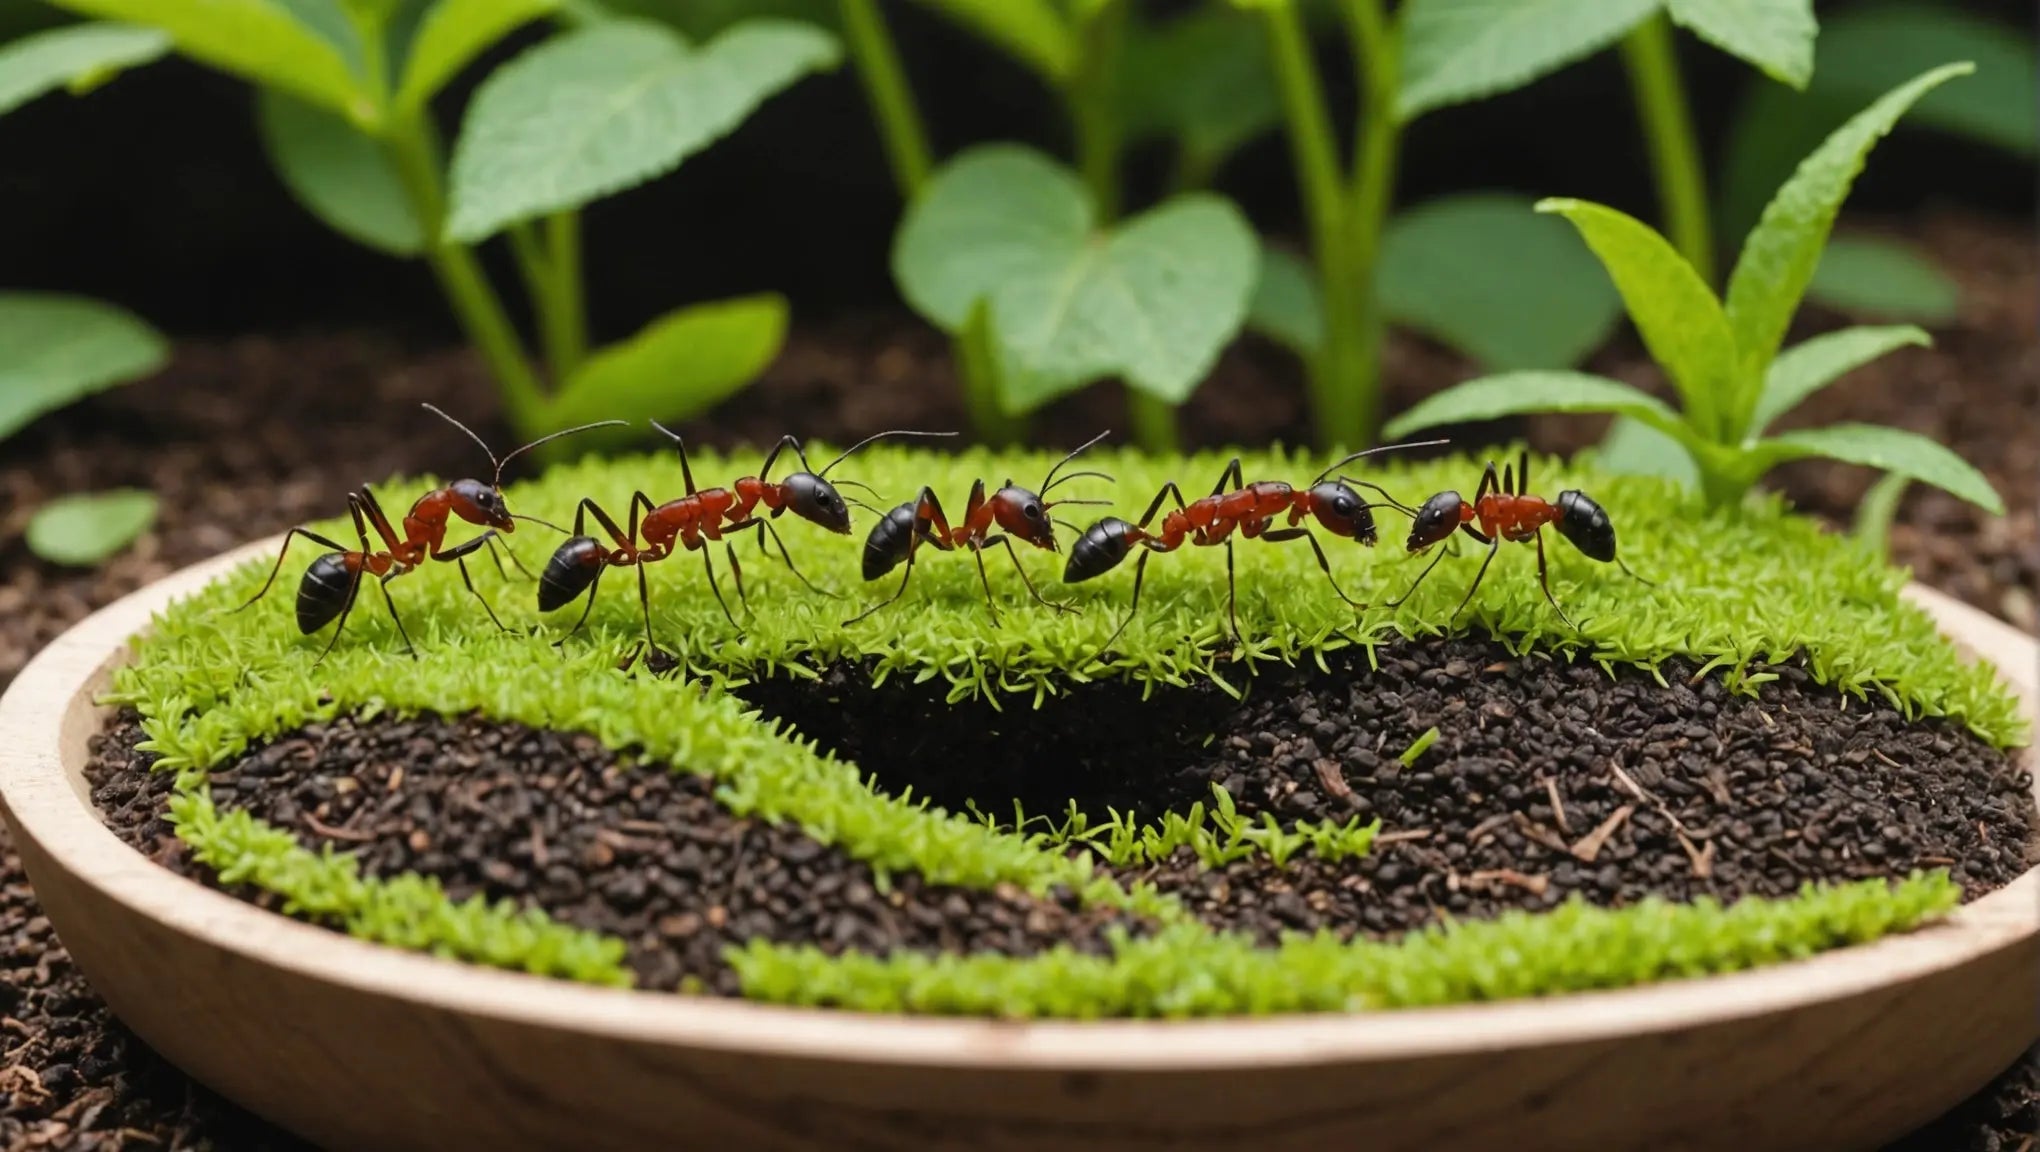 Create an Ant-astic Habitat with our Ant Arenas